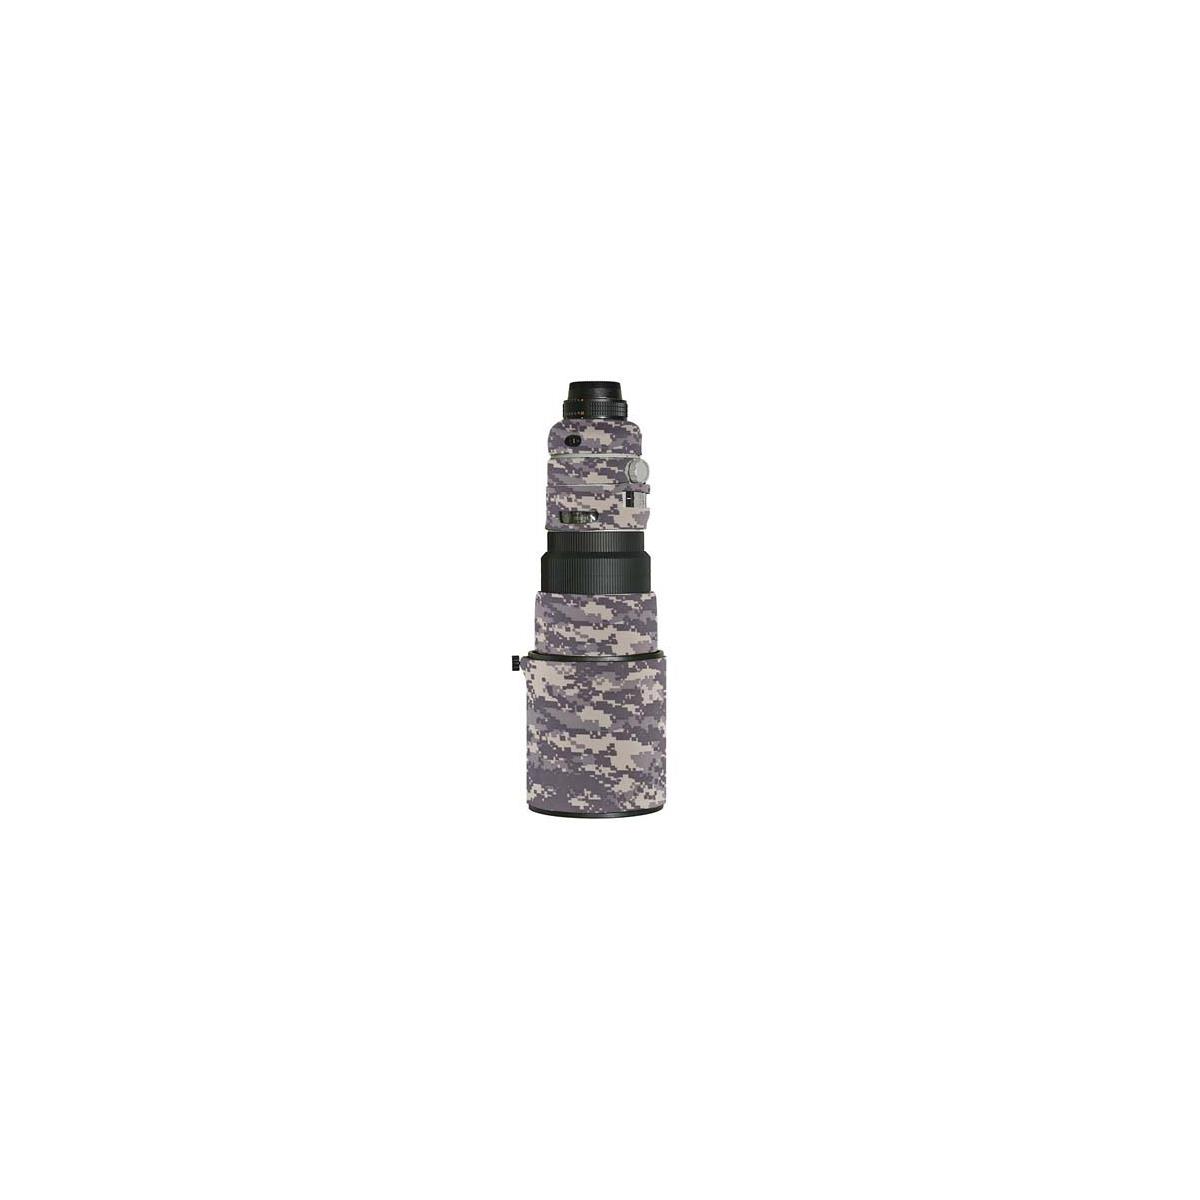 Image of LensCoat Lens Cover for the Nikon 300mm AFS II Lens - Army Digital Camo (dc)